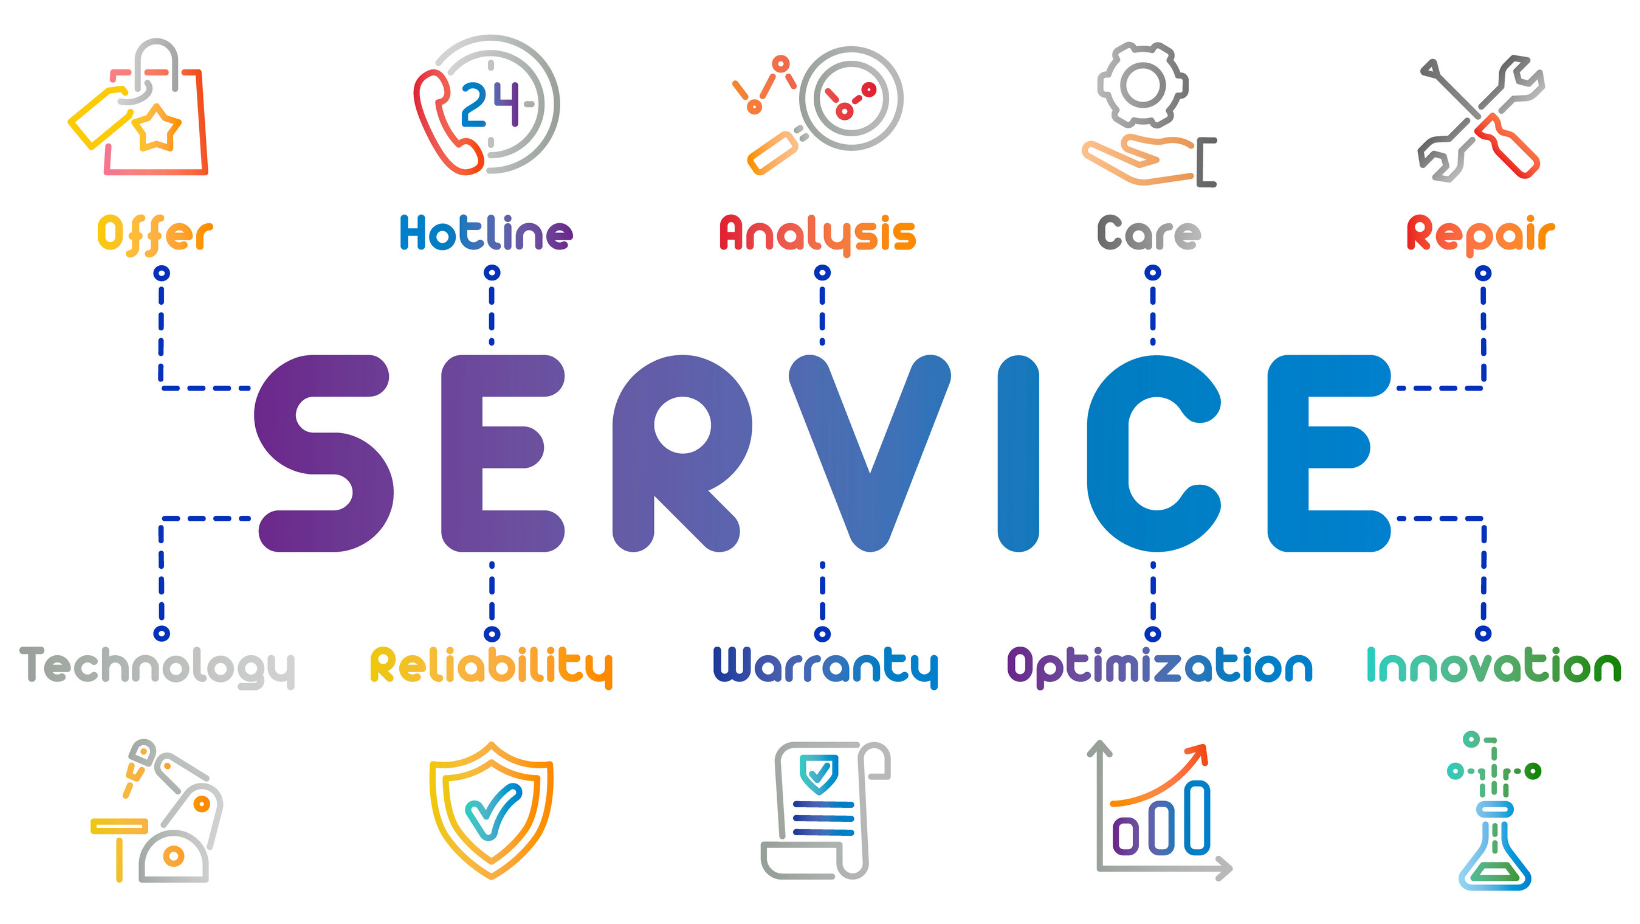 What are Services? Definitions, Characteristics and Its Role In Business.